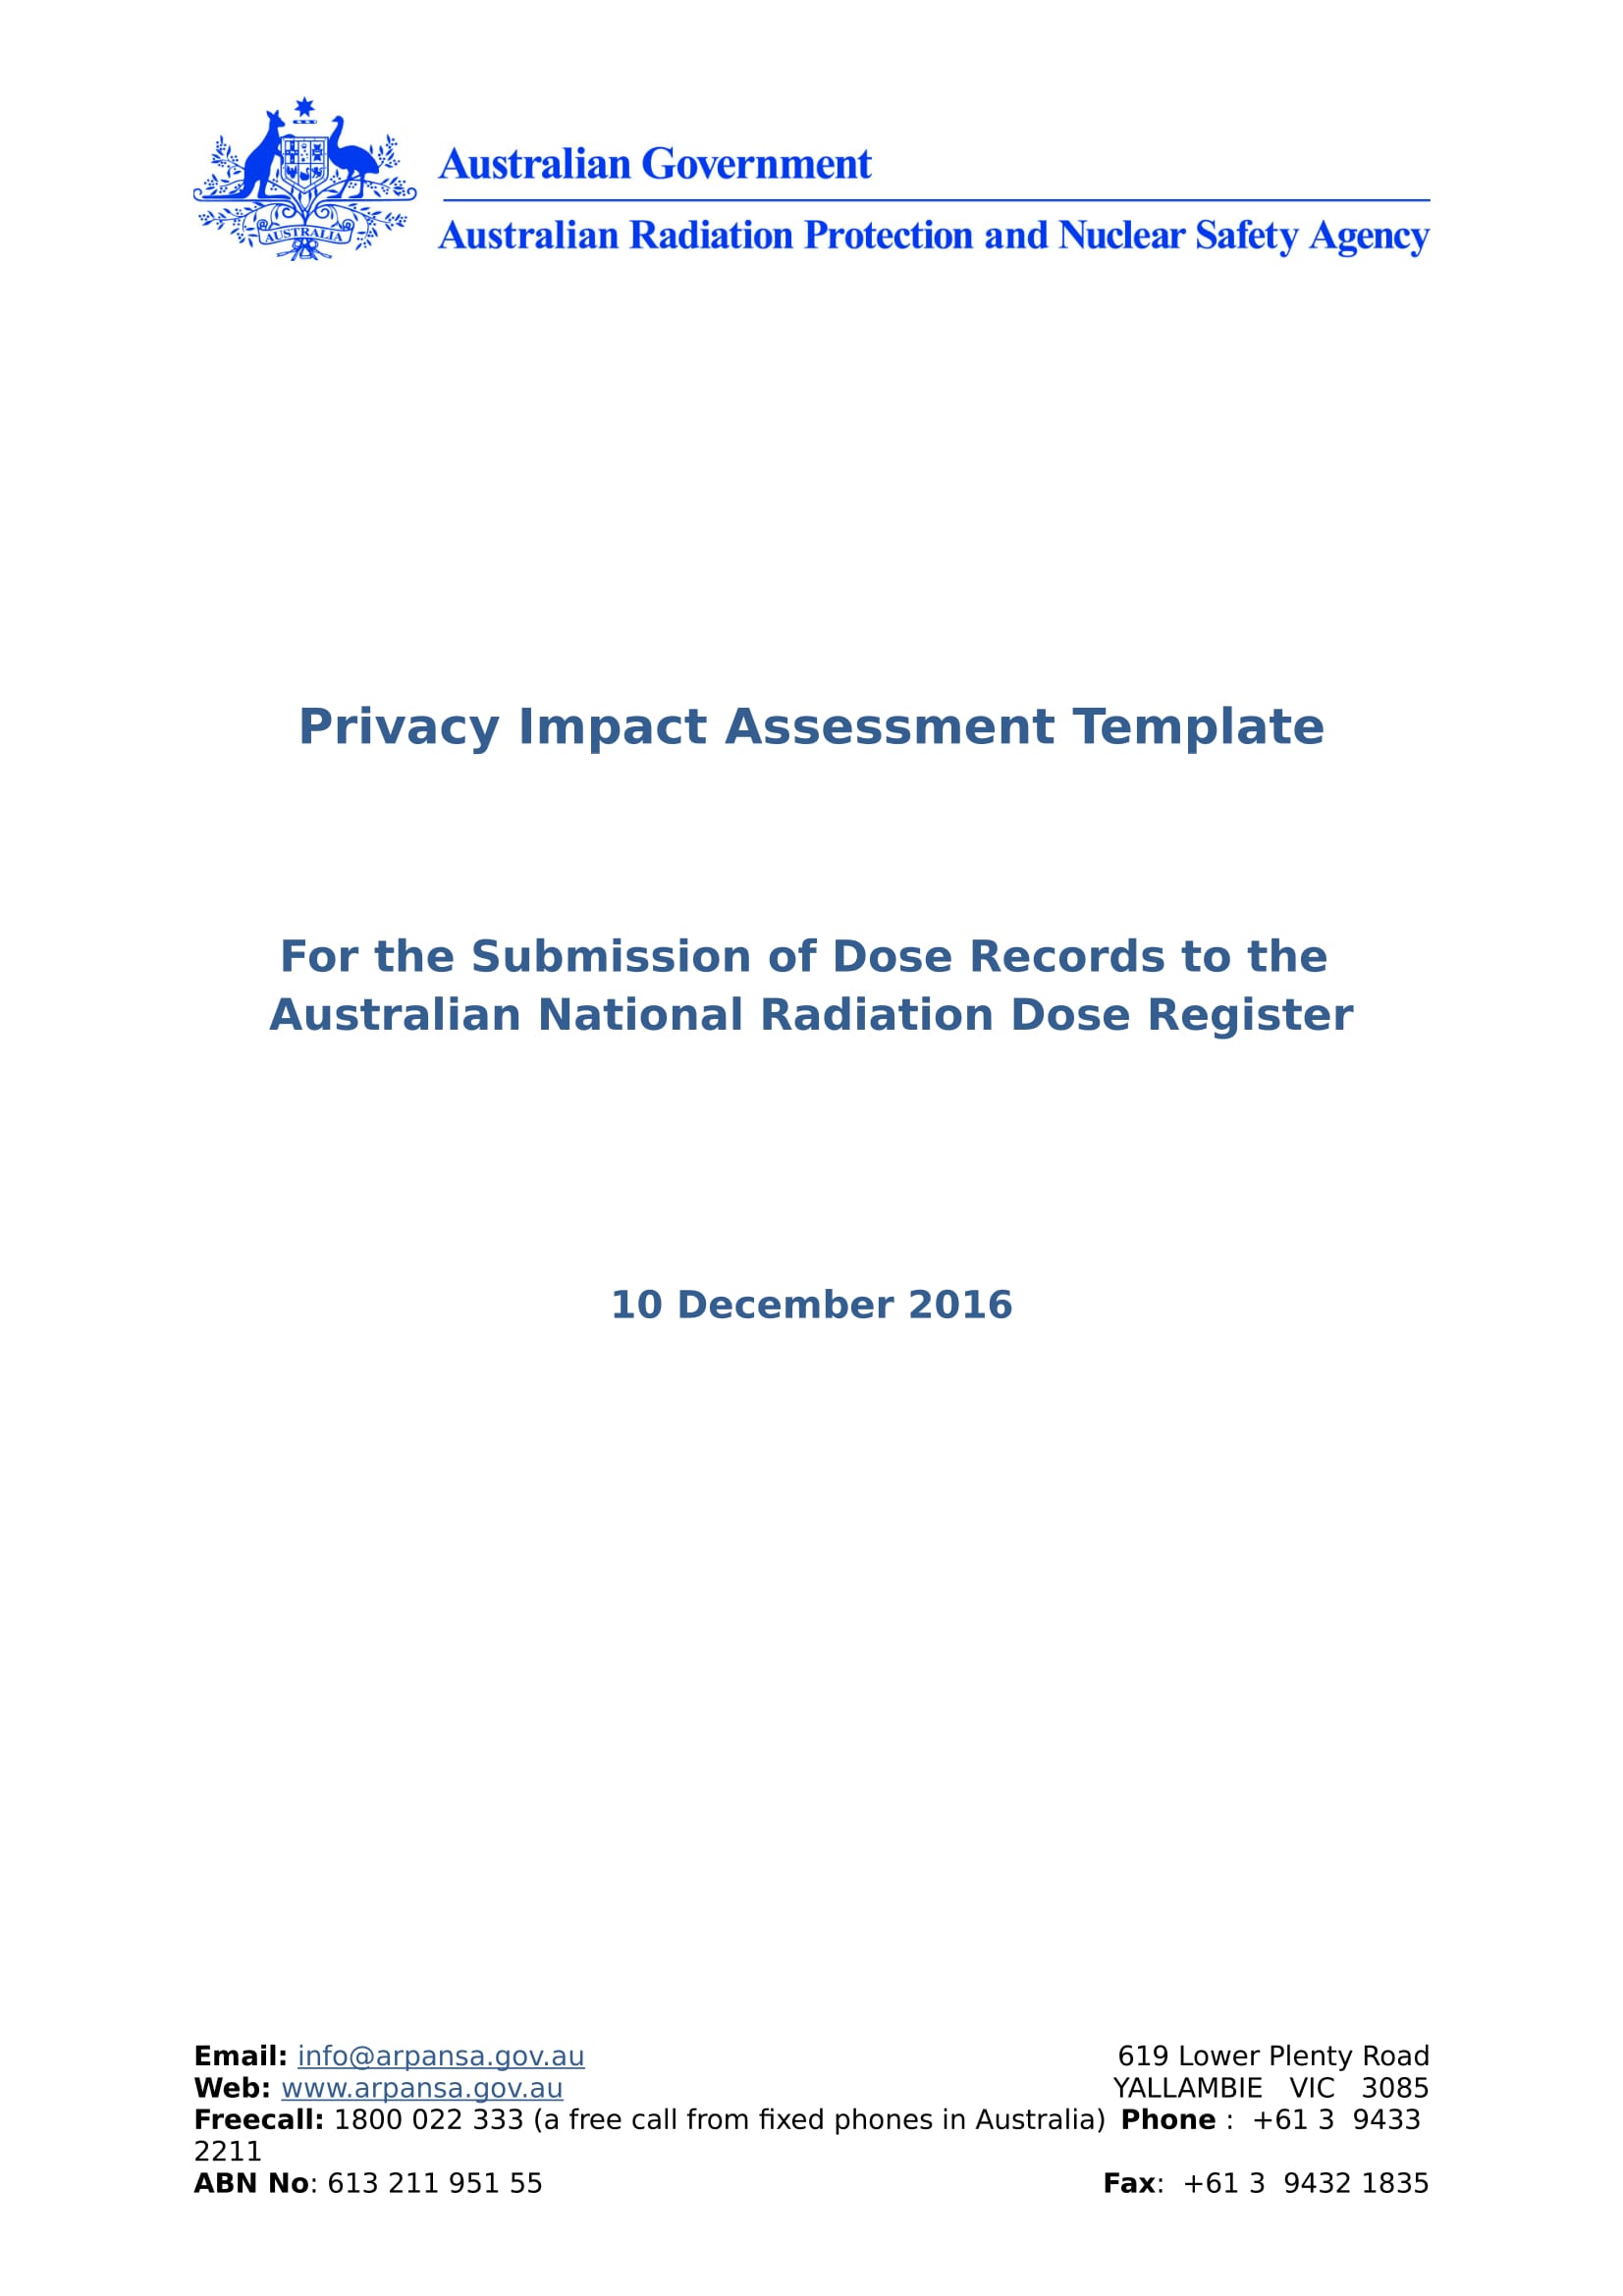 Privacy Impact Assessment Template Example 01